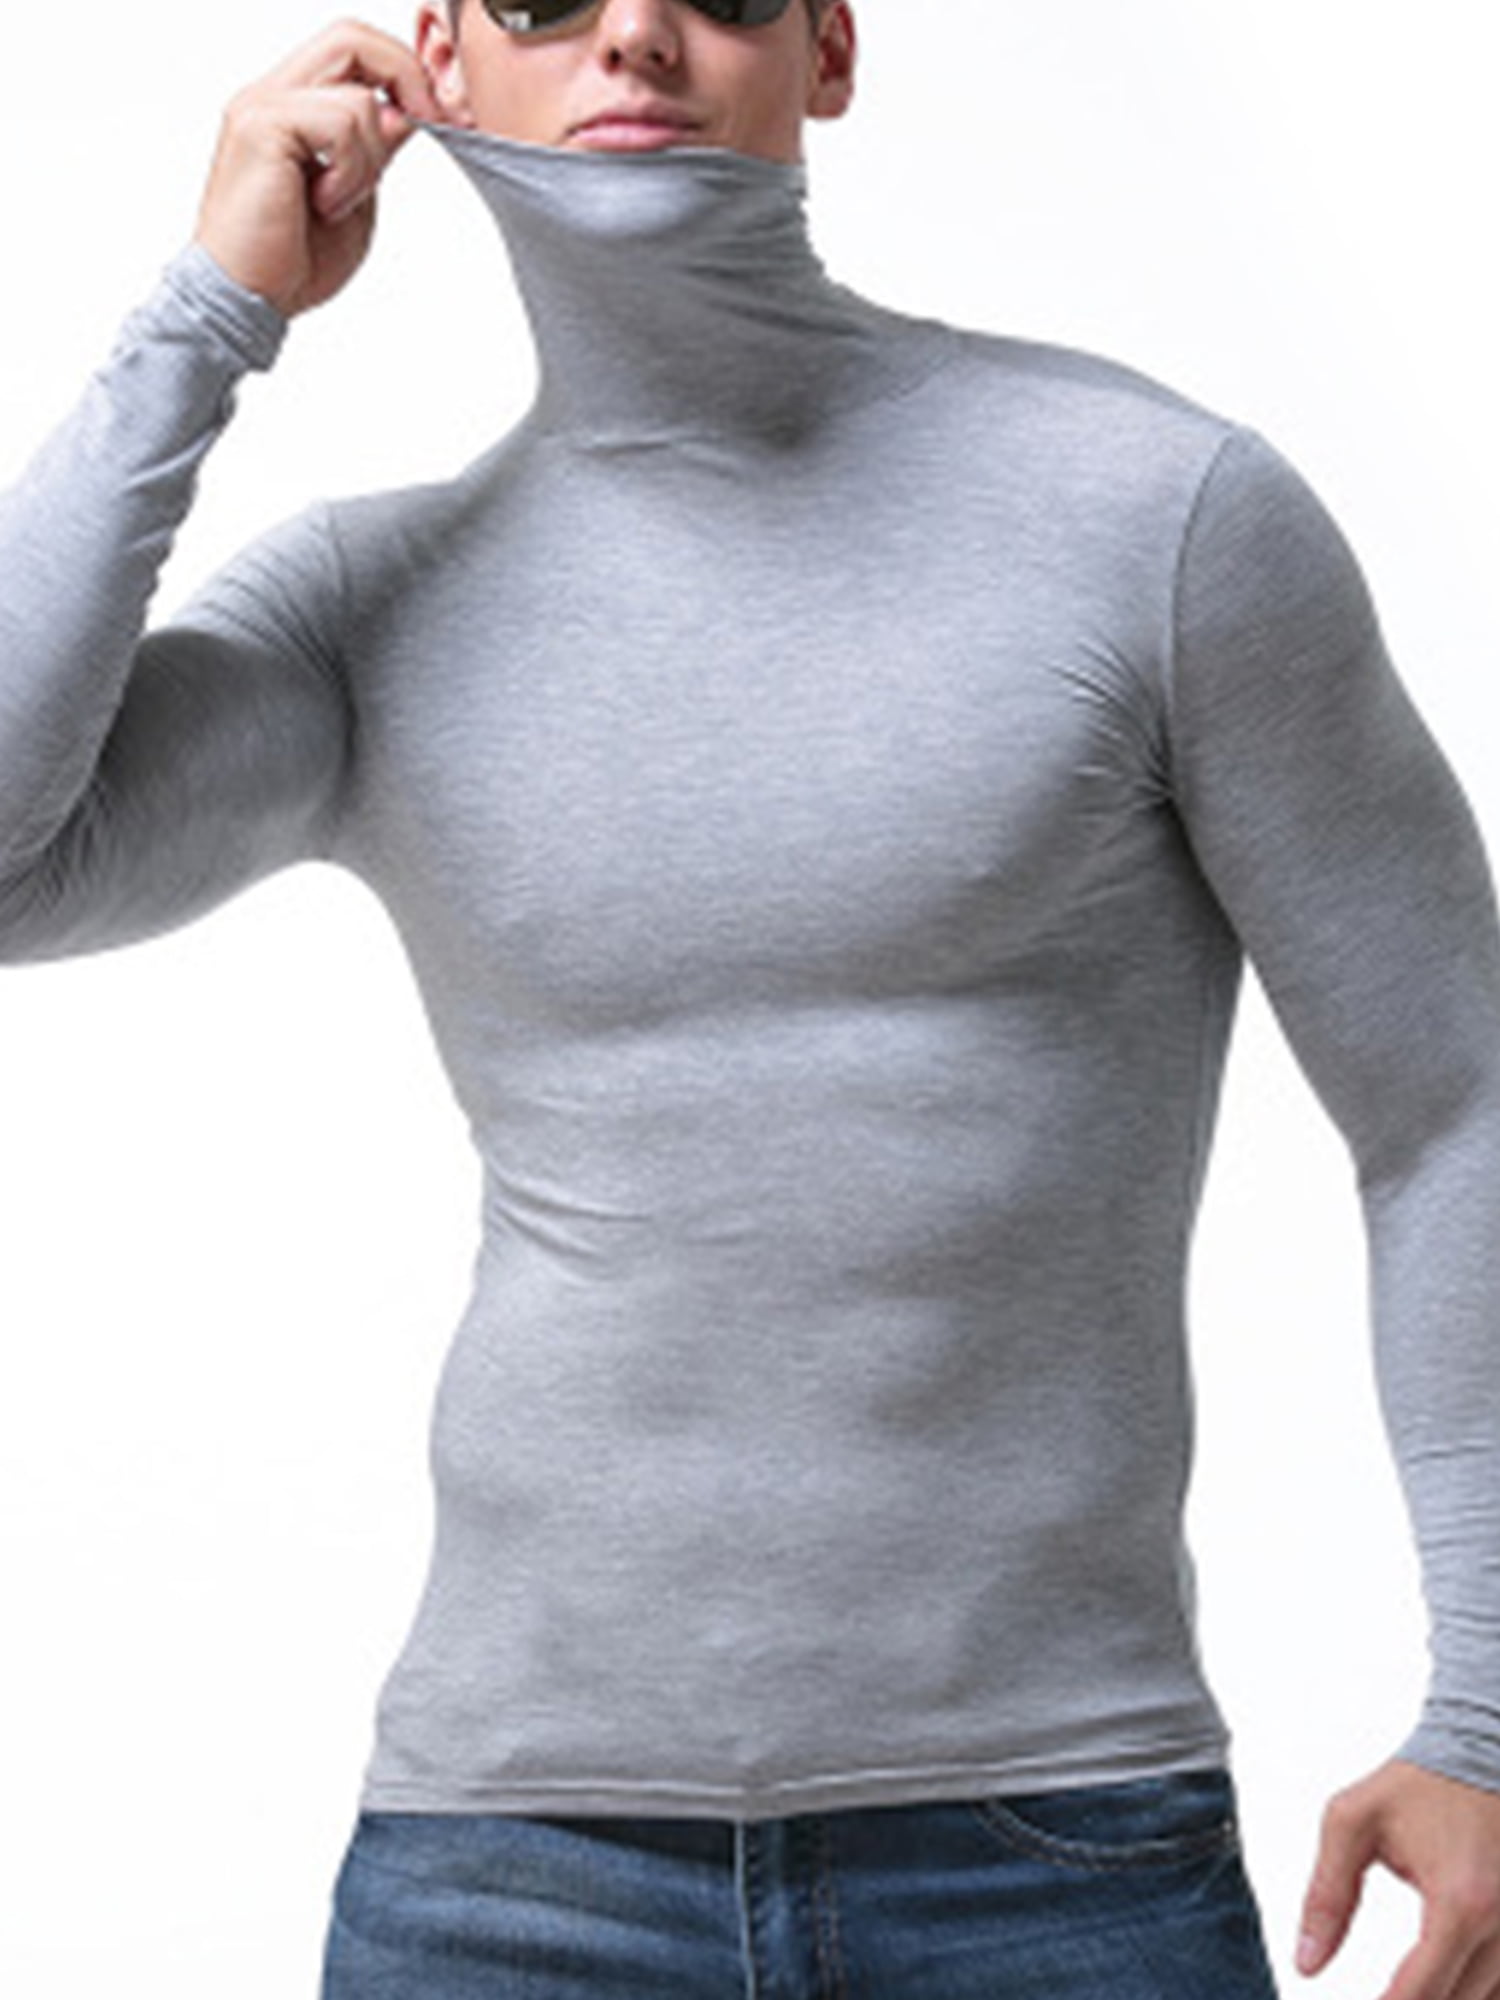 Men's High Turtle Neck Sweater Layer T-shirt Slim Fit Tops Thermal Under Base